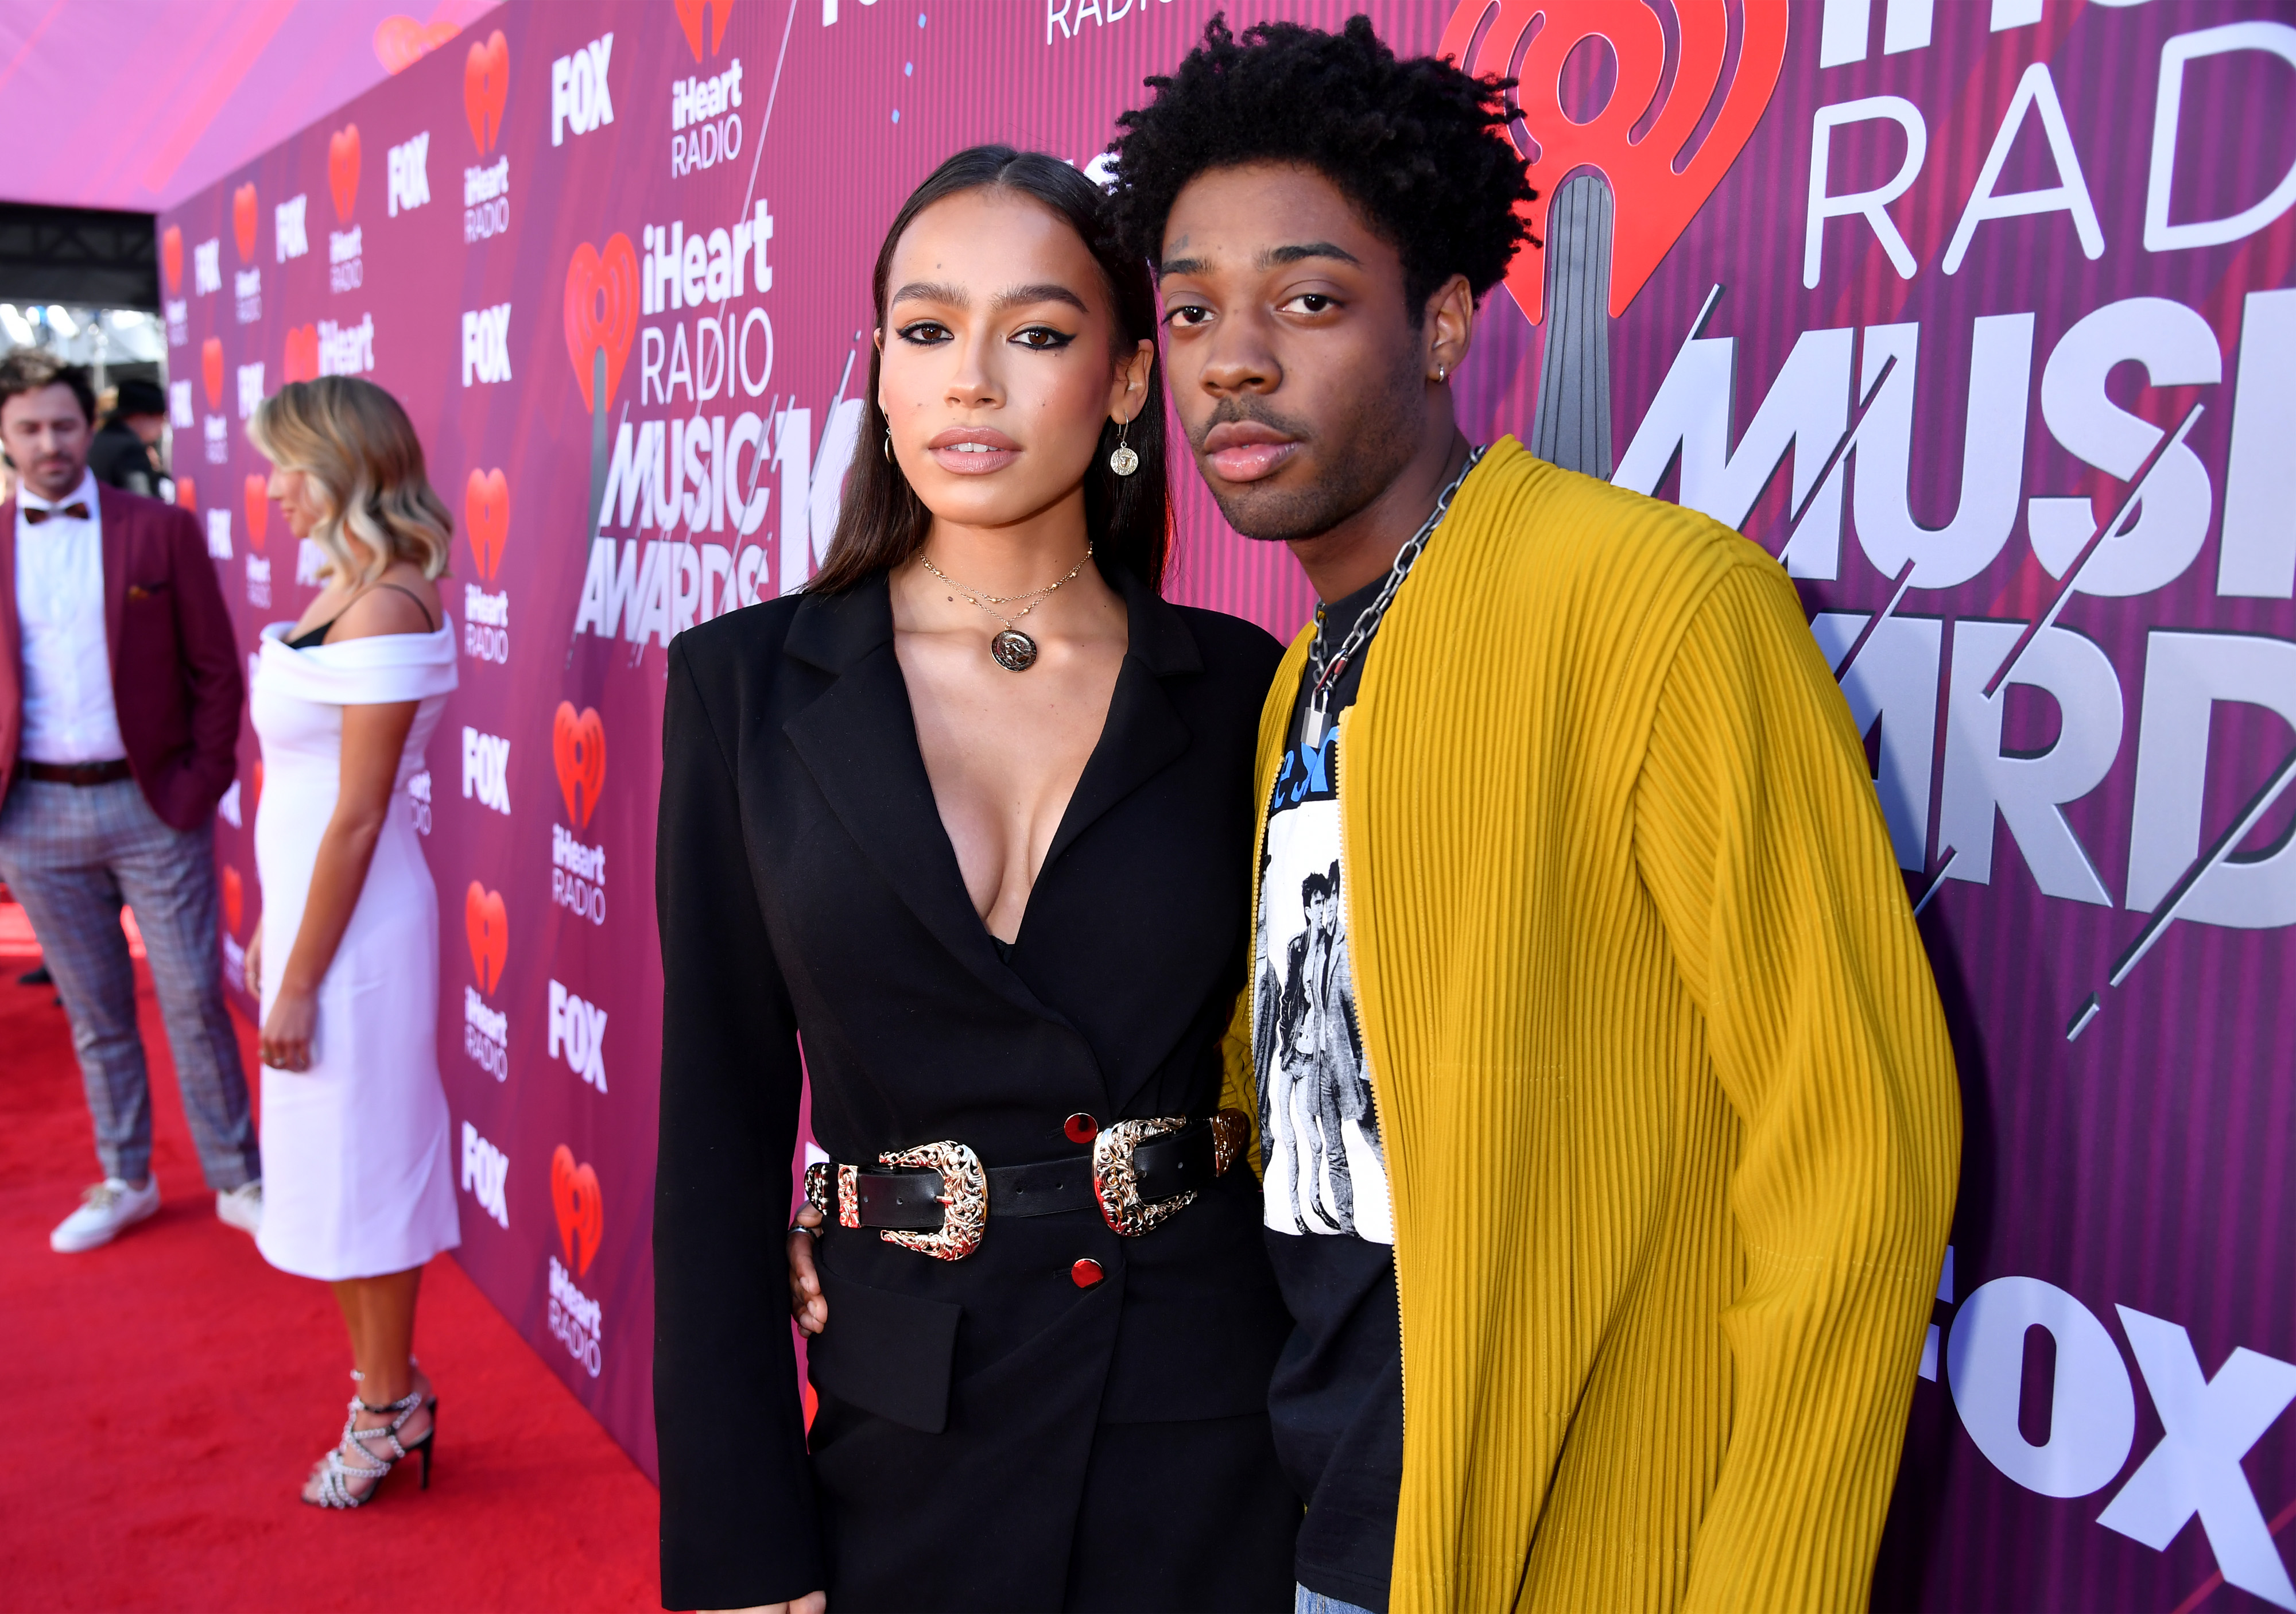 Zahara Davis and Brent Faiyaz during the 2019 iHeartRadio Music Awards at Microsoft Theater on March 14, 2019, in Los Angeles, California. | Source: Getty Images